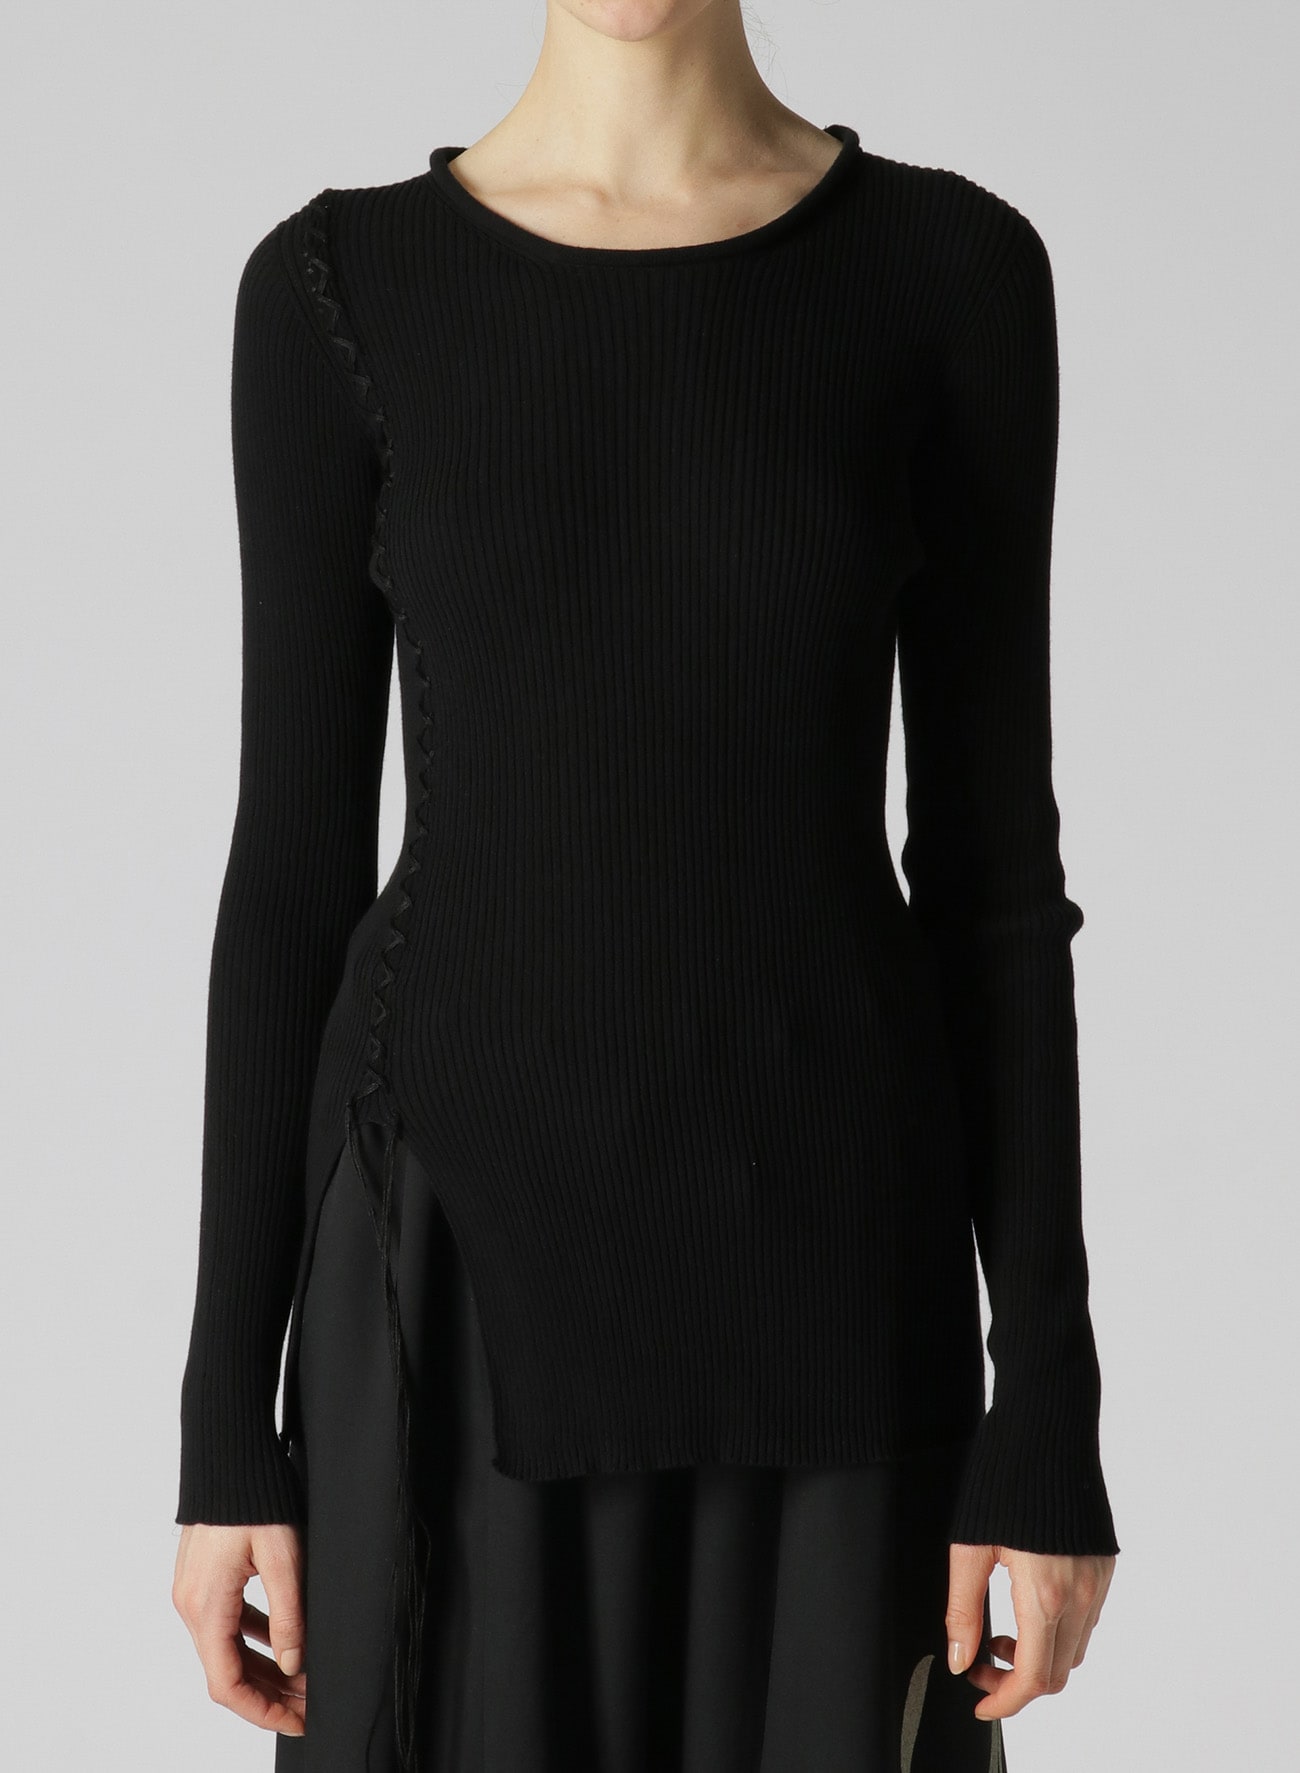 LACED UP LONG SLEEVE ROUND NECK RIBBED KNIT(S Black): Y's｜THE 